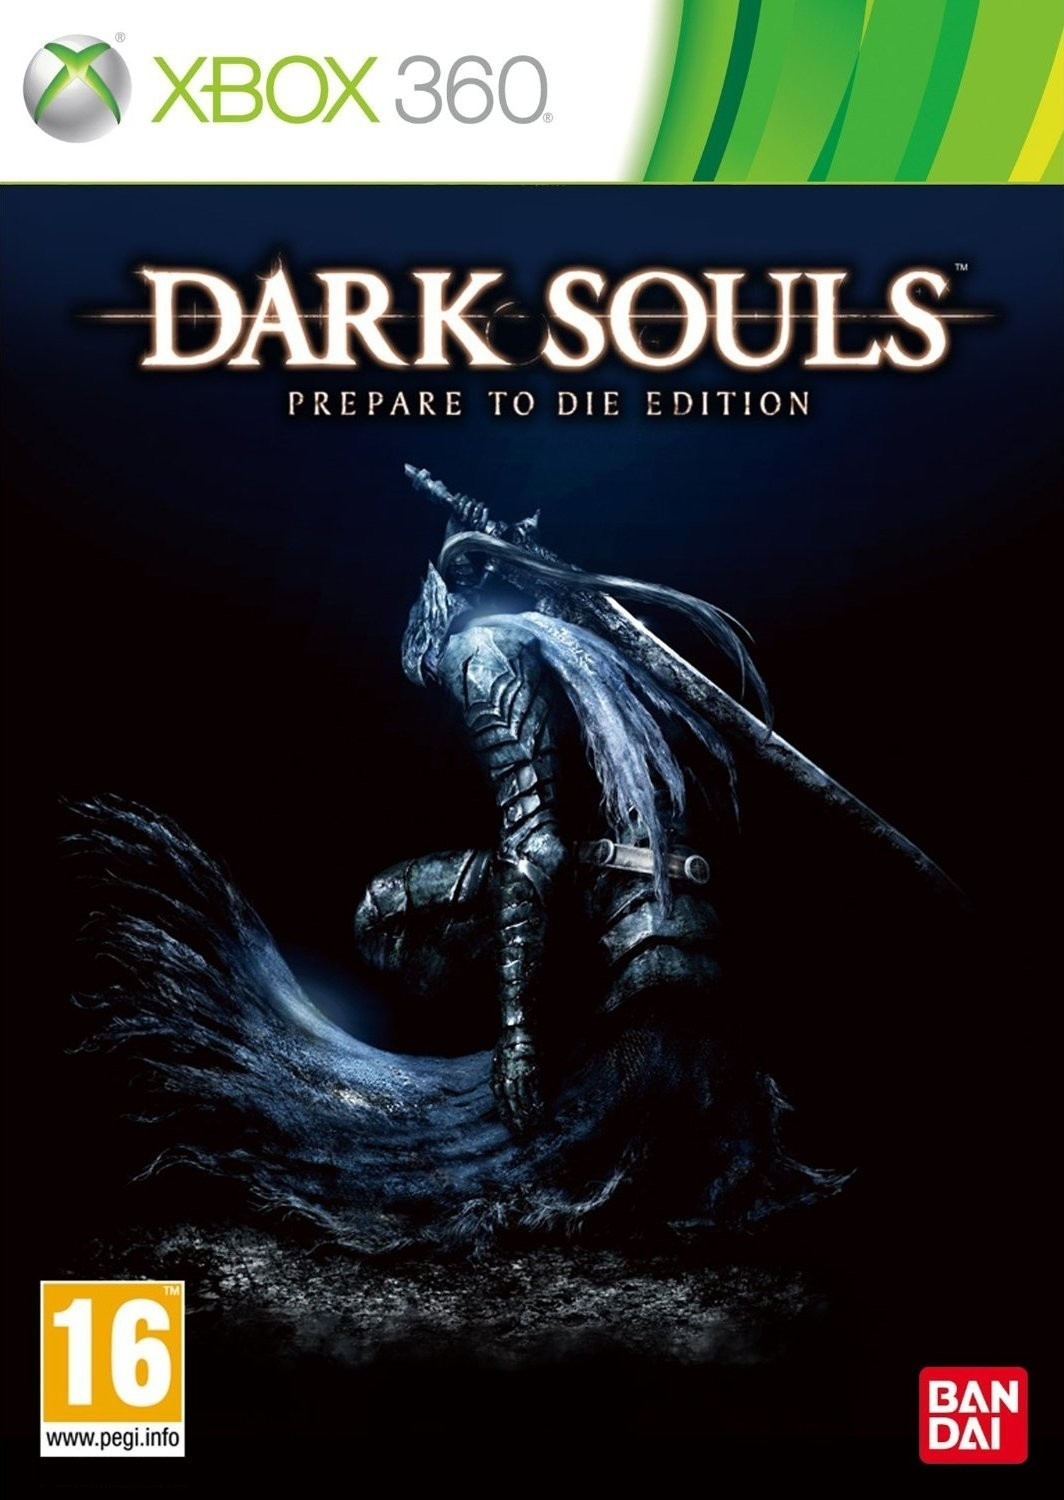 buy-dark-souls-prepare-to-die-edition-xbox-360-from-24-99-today-best-deals-on-idealo-co-uk